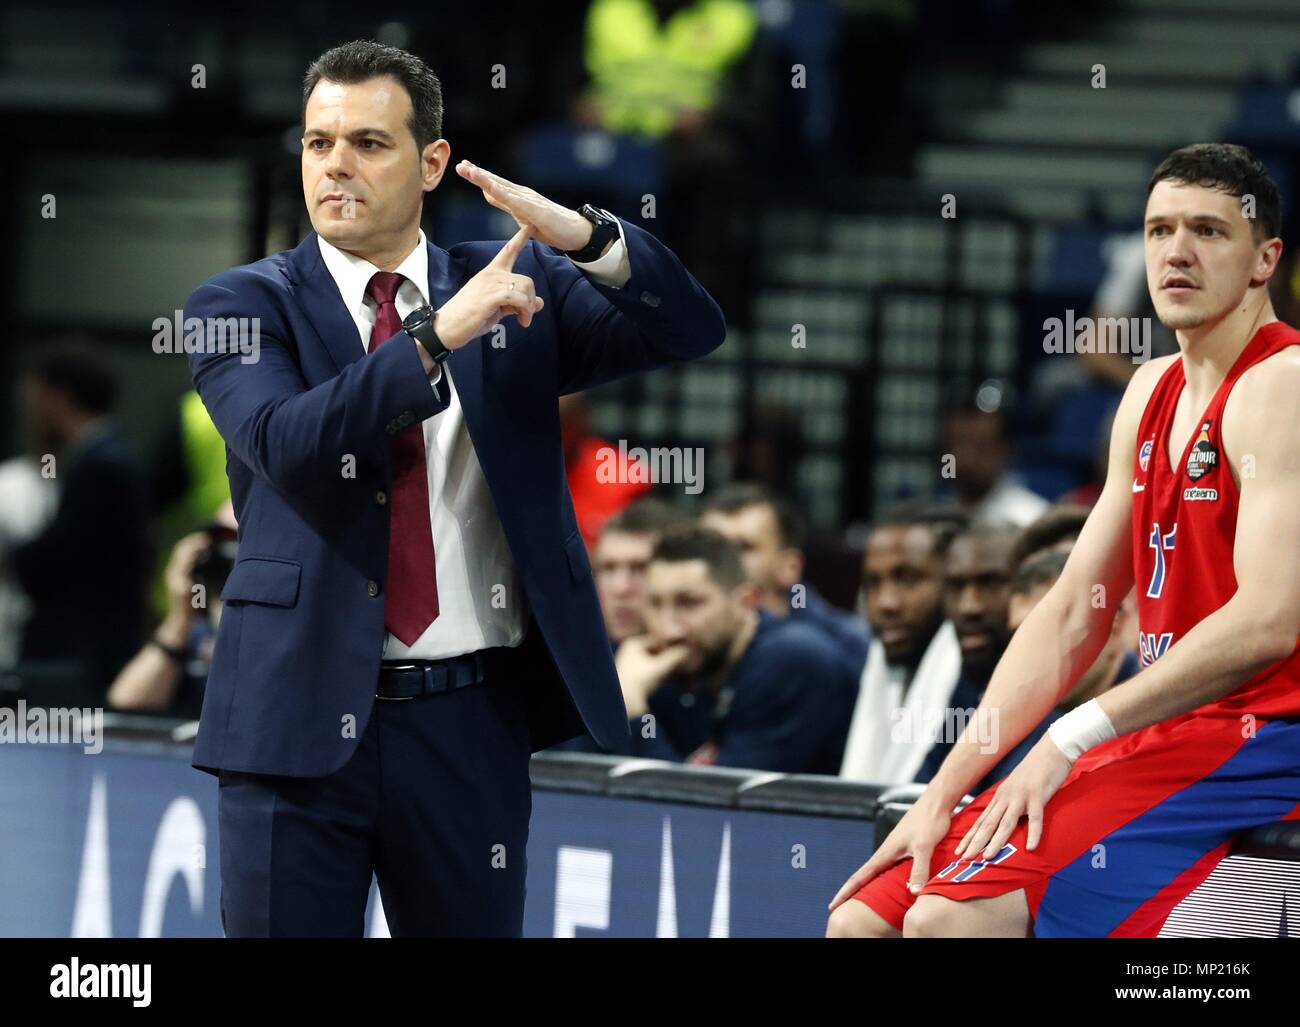 Belgrade, Serbia. 20th May, 2018. CSKA Moscow's head coach Dimitri Itoudis  (L) ask time with player Antónov Semión (R) during the Euroleague Final  Four third place basketball match between CSKA Moscow and